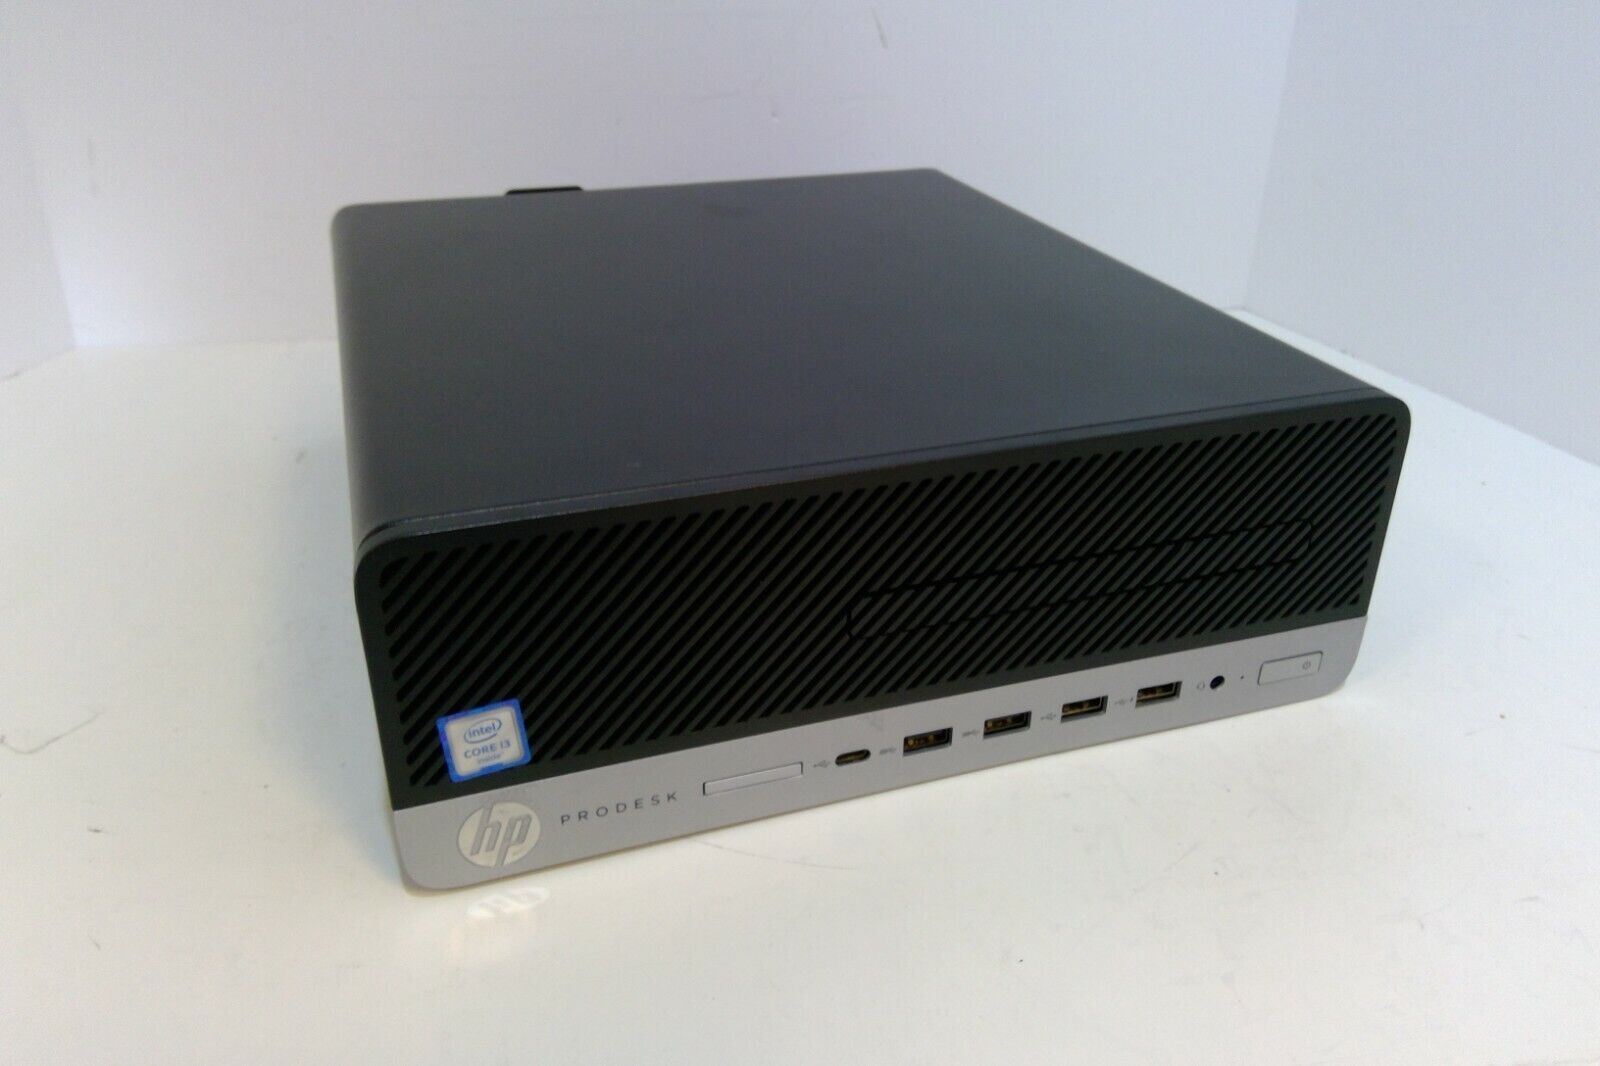 HP Max 78% Max 89% OFF OFF 1FY49UT ProDesk 600 G3 SFF WIND i3-6100 HDD 3.70GHz 8GB 500GB